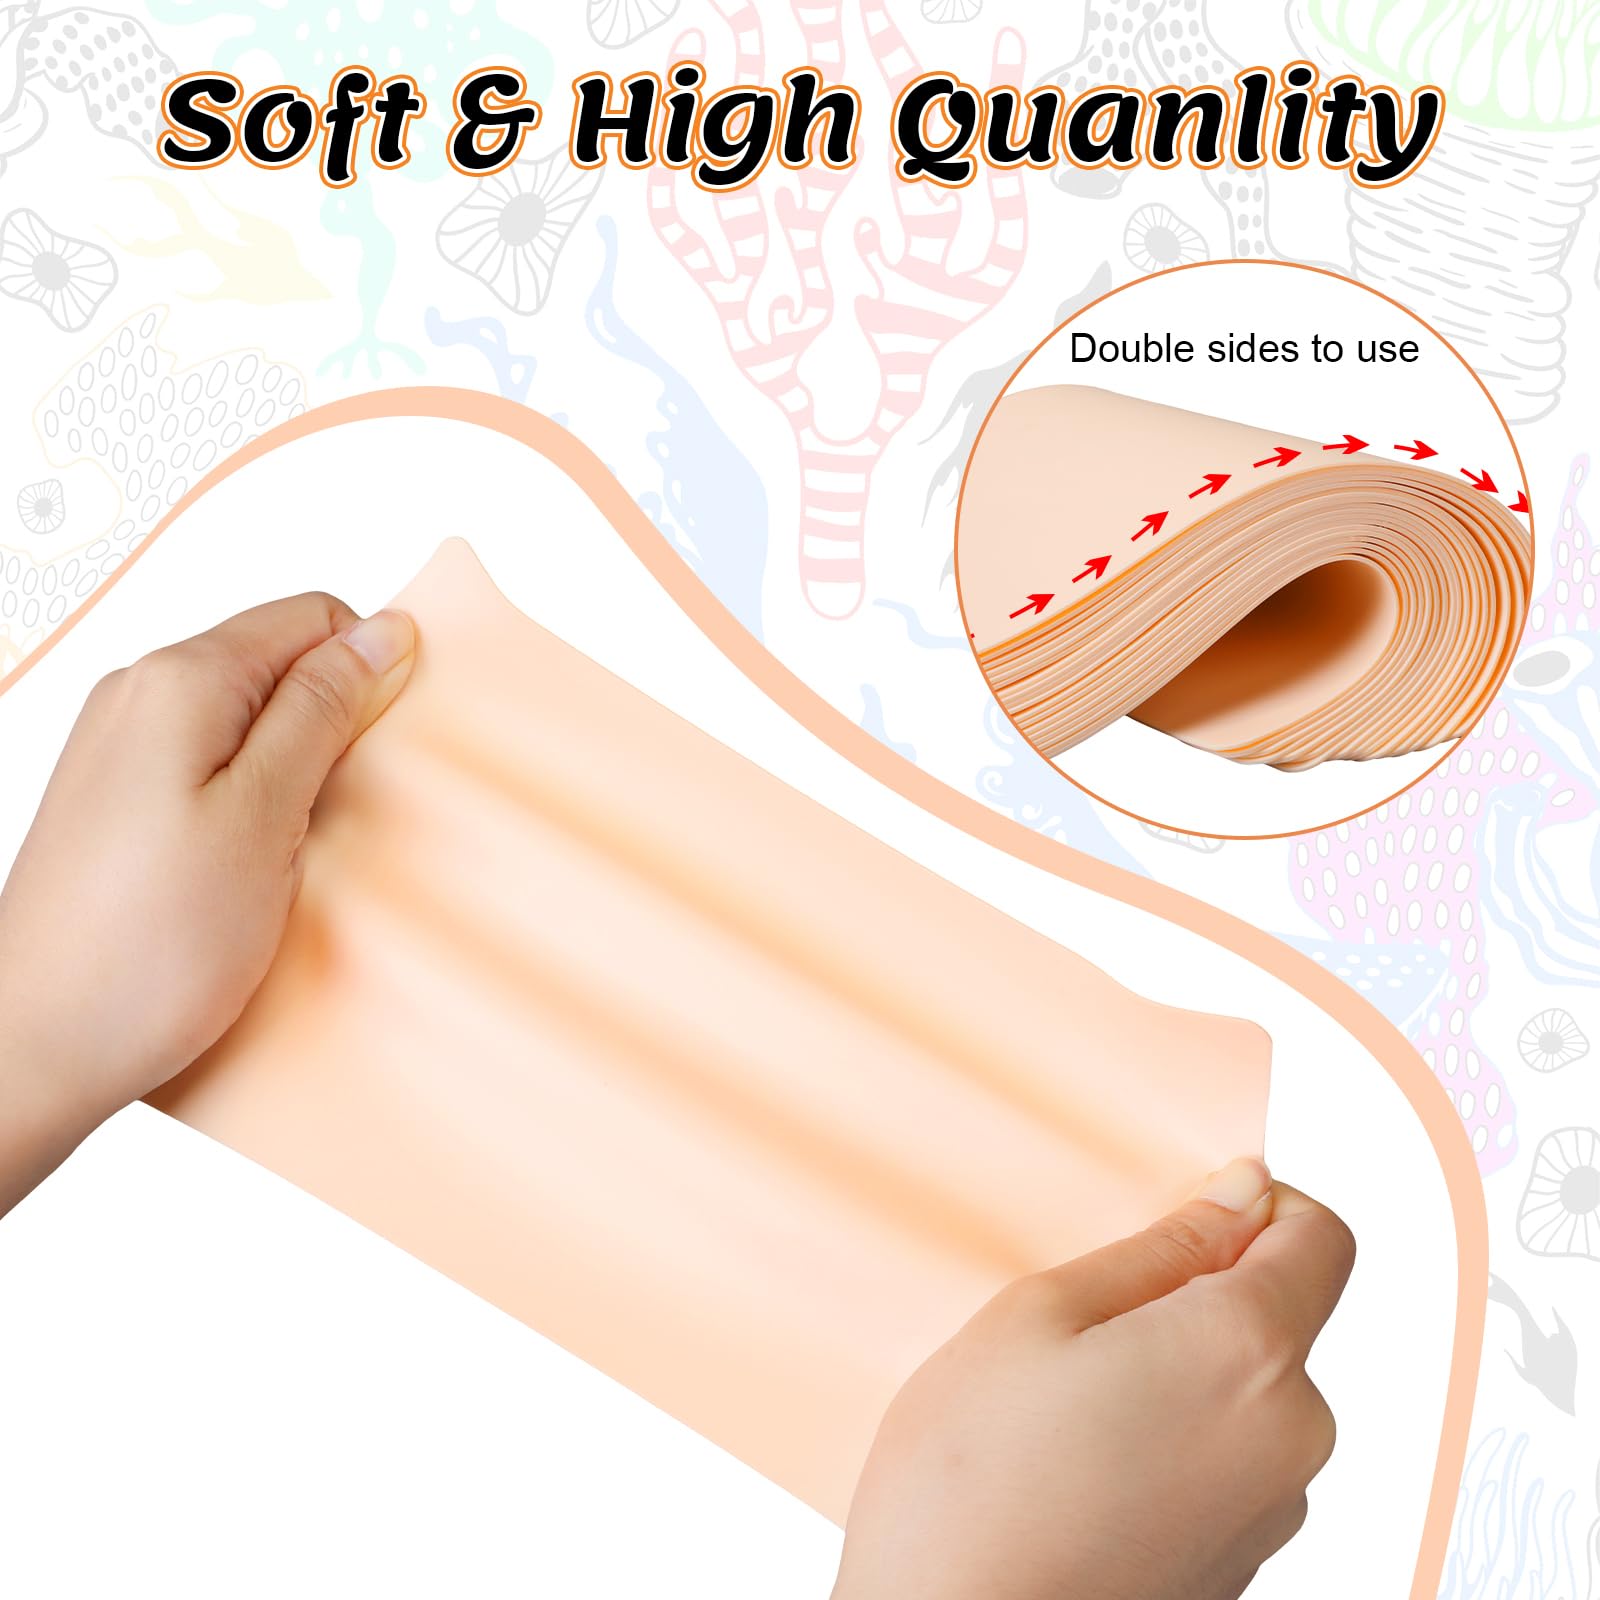 Sosation 7.6"x5.7" Blank Tattoo Practice Skin Double Sided Silicone - 100pcs